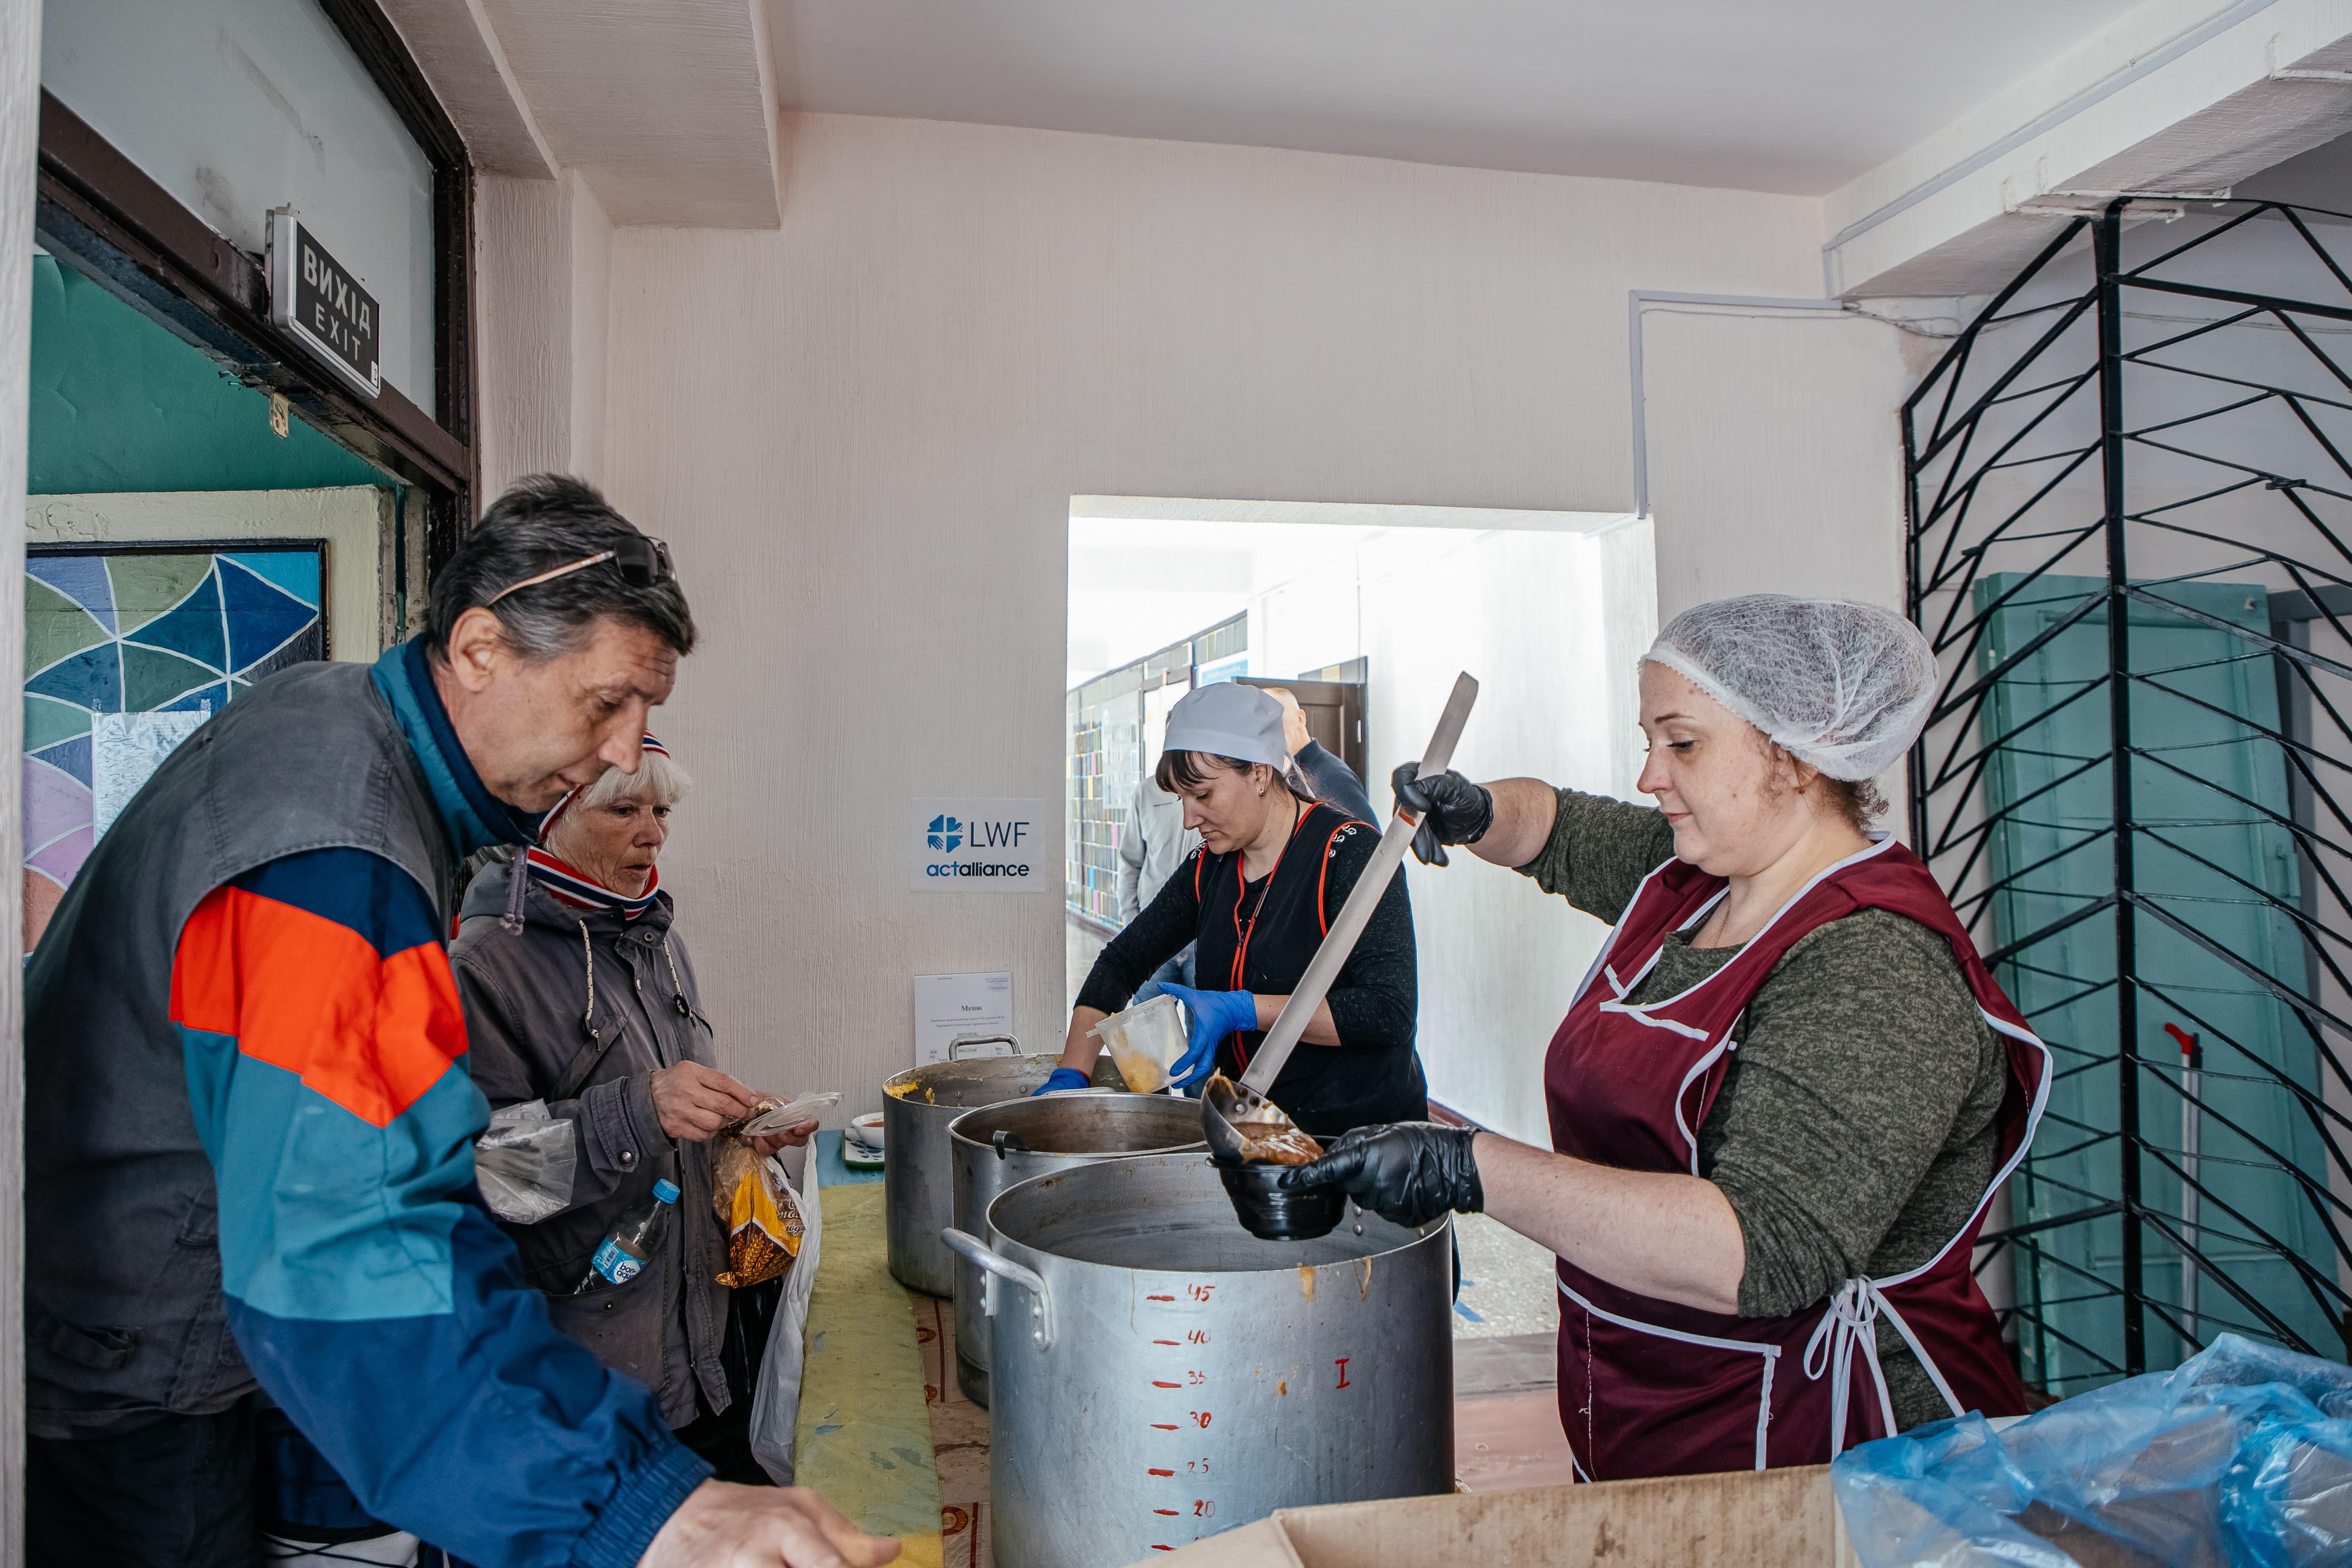 An LWF supported heating point and municipal kitchen located in the Saltovka district of Kharkiv. Through places like these, LWF distributed 35,000 hot meals daily to vulnerable populations in Kharkiv, from April t June 2023. Photo: LWF/ Anatoliy Nazarenko